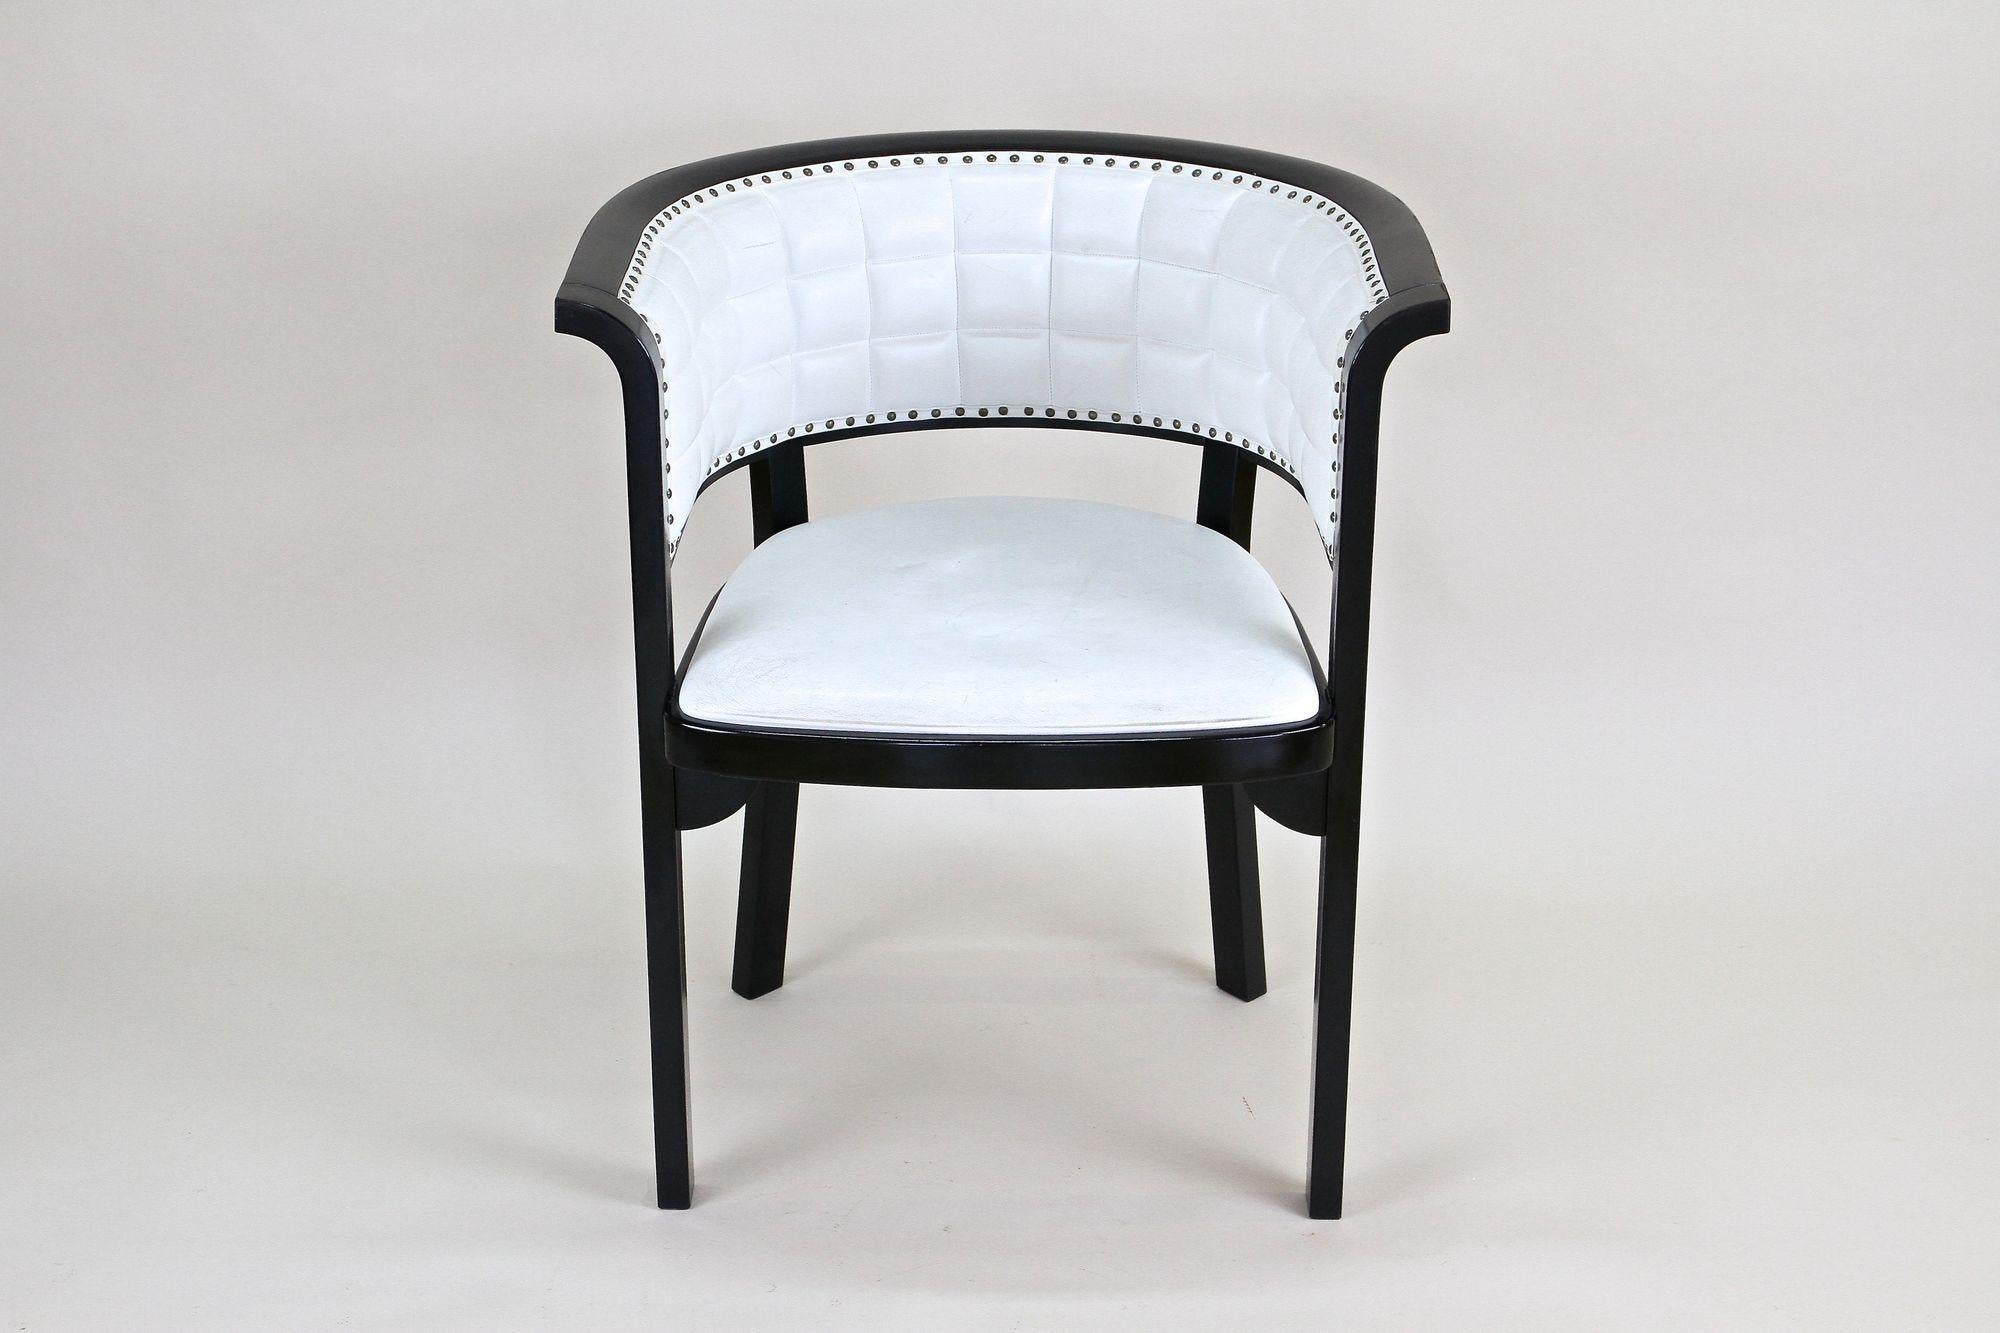 Exclusive 20th century re-edition of the famous Thonet armchair originally designed by Marcel Kammerer in the beginning of the 20th century aorund 1910. This amazing looking armchair has been produced by the famous company of Thonet Vienna around